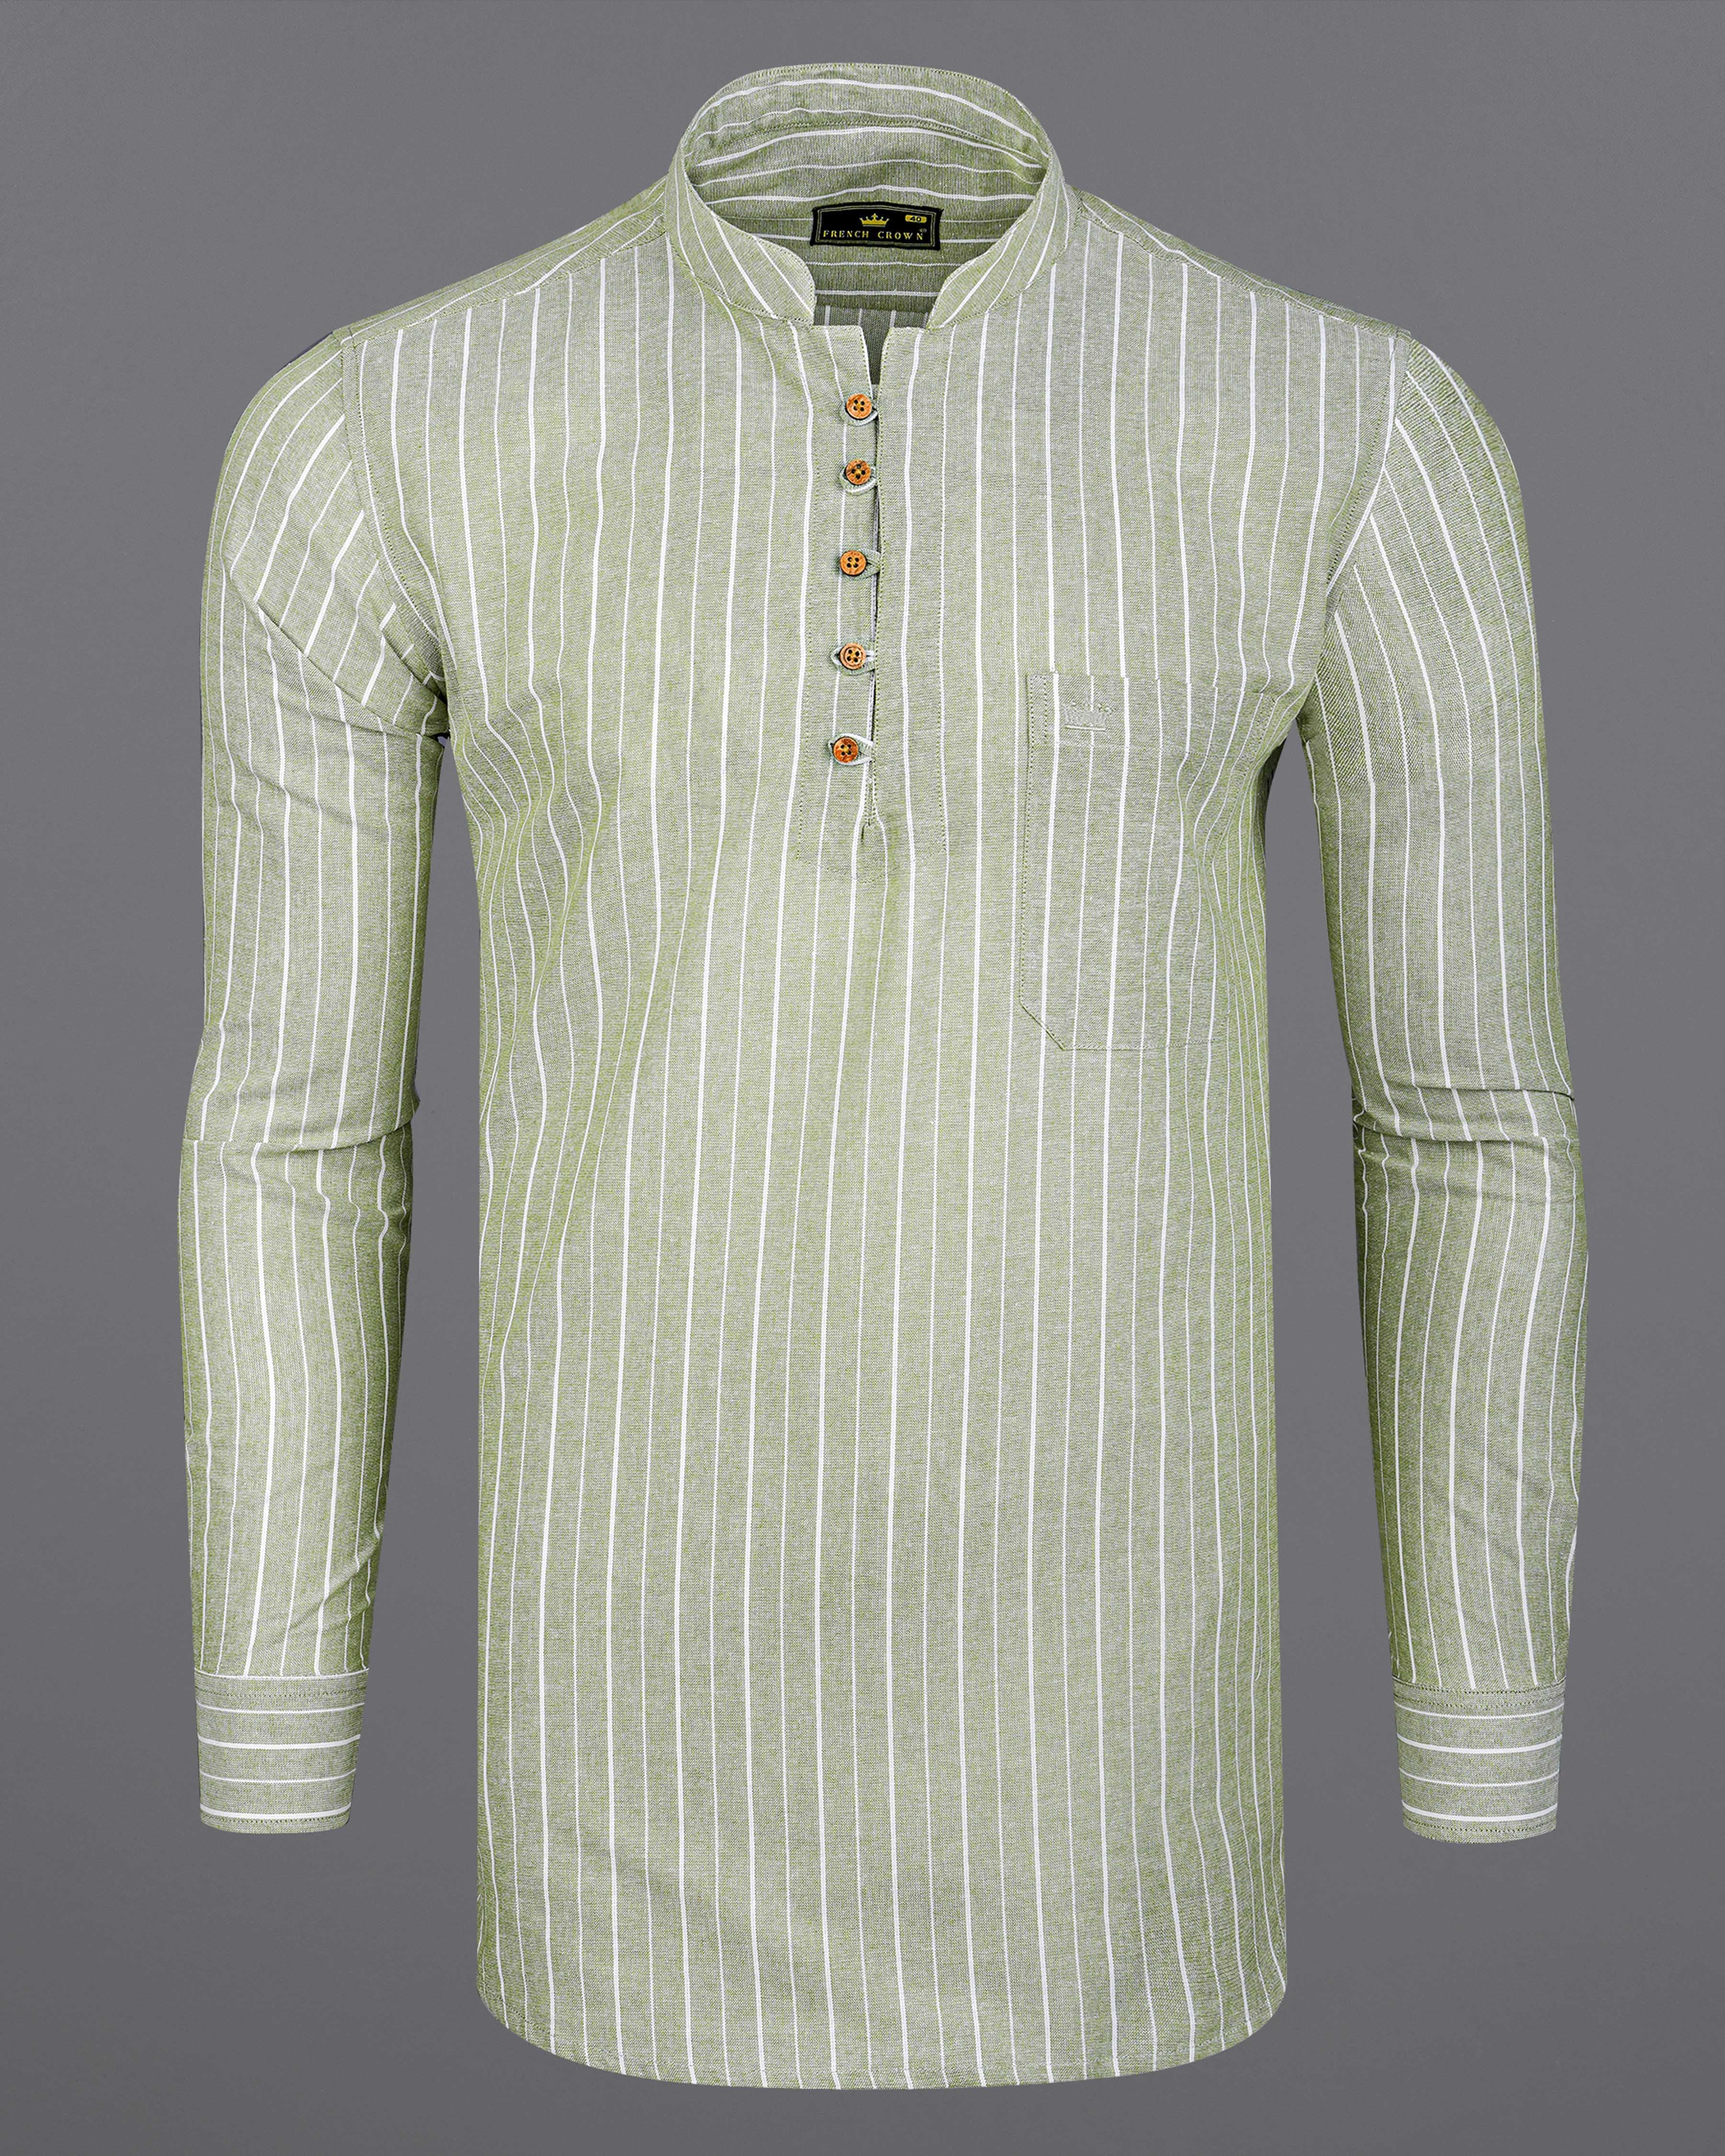 Beryl Green and White Striped Royal Oxford Kurta Shirt 8325-KS -38,8325-KS -H-38,8325-KS -39,8325-KS -H-39,8325-KS -40,8325-KS -H-40,8325-KS -42,8325-KS -H-42,8325-KS -44,8325-KS -H-44,8325-KS -46,8325-KS -H-46,8325-KS -48,8325-KS -H-48,8325-KS -50,8325-KS -H-50,8325-KS -52,8325-KS -H-52